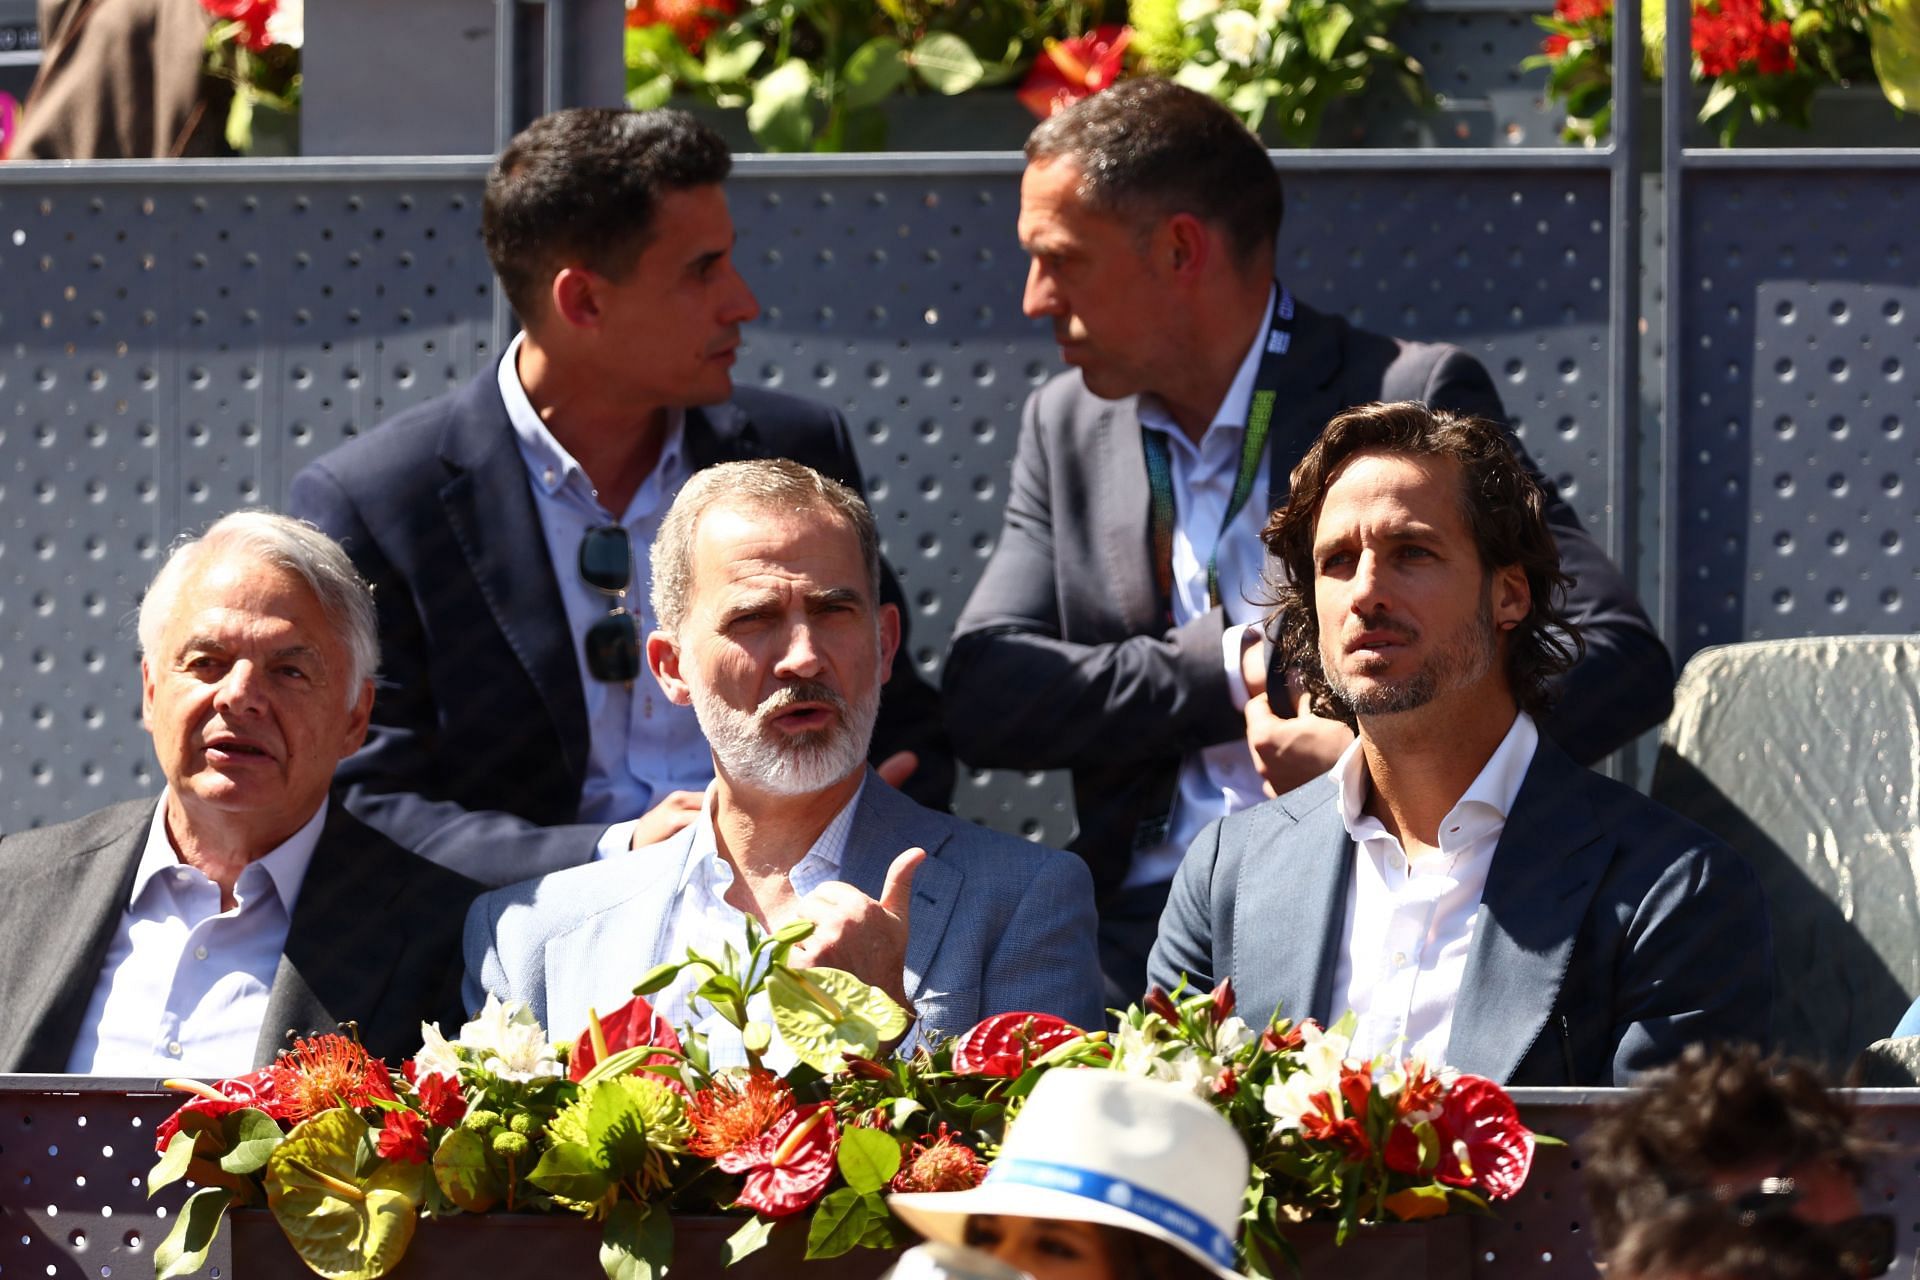 The King of Spain with Feliciano Lopez at the quarterfinal match